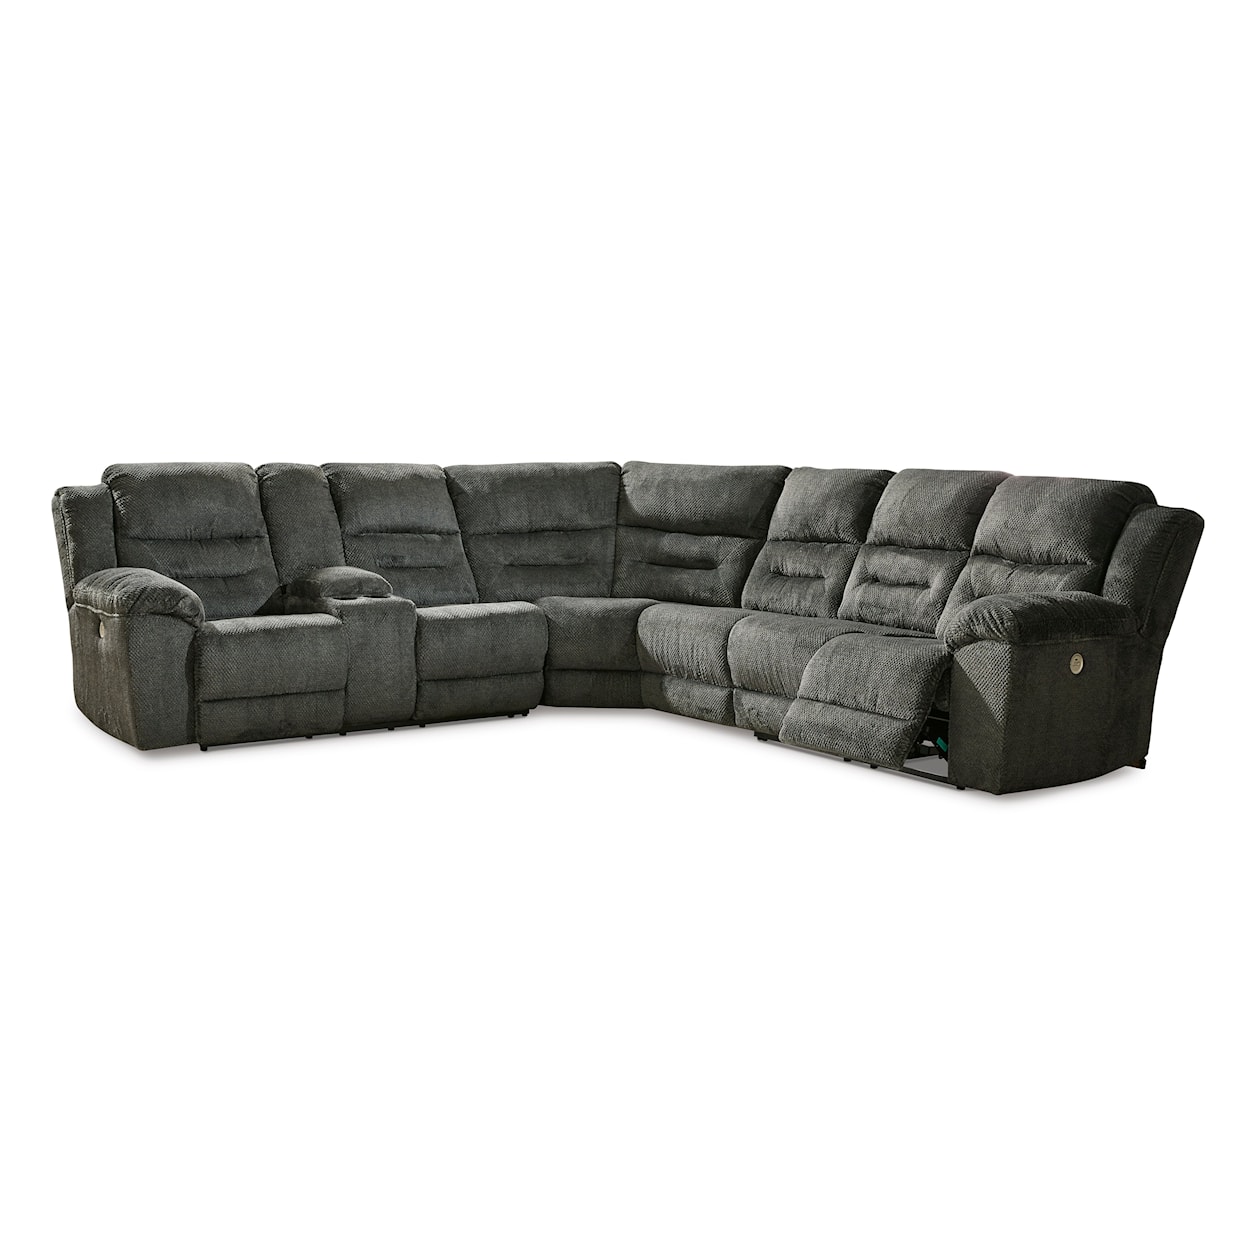 Signature Design by Ashley Furniture Nettington 4-Piece Power Reclining Sectional